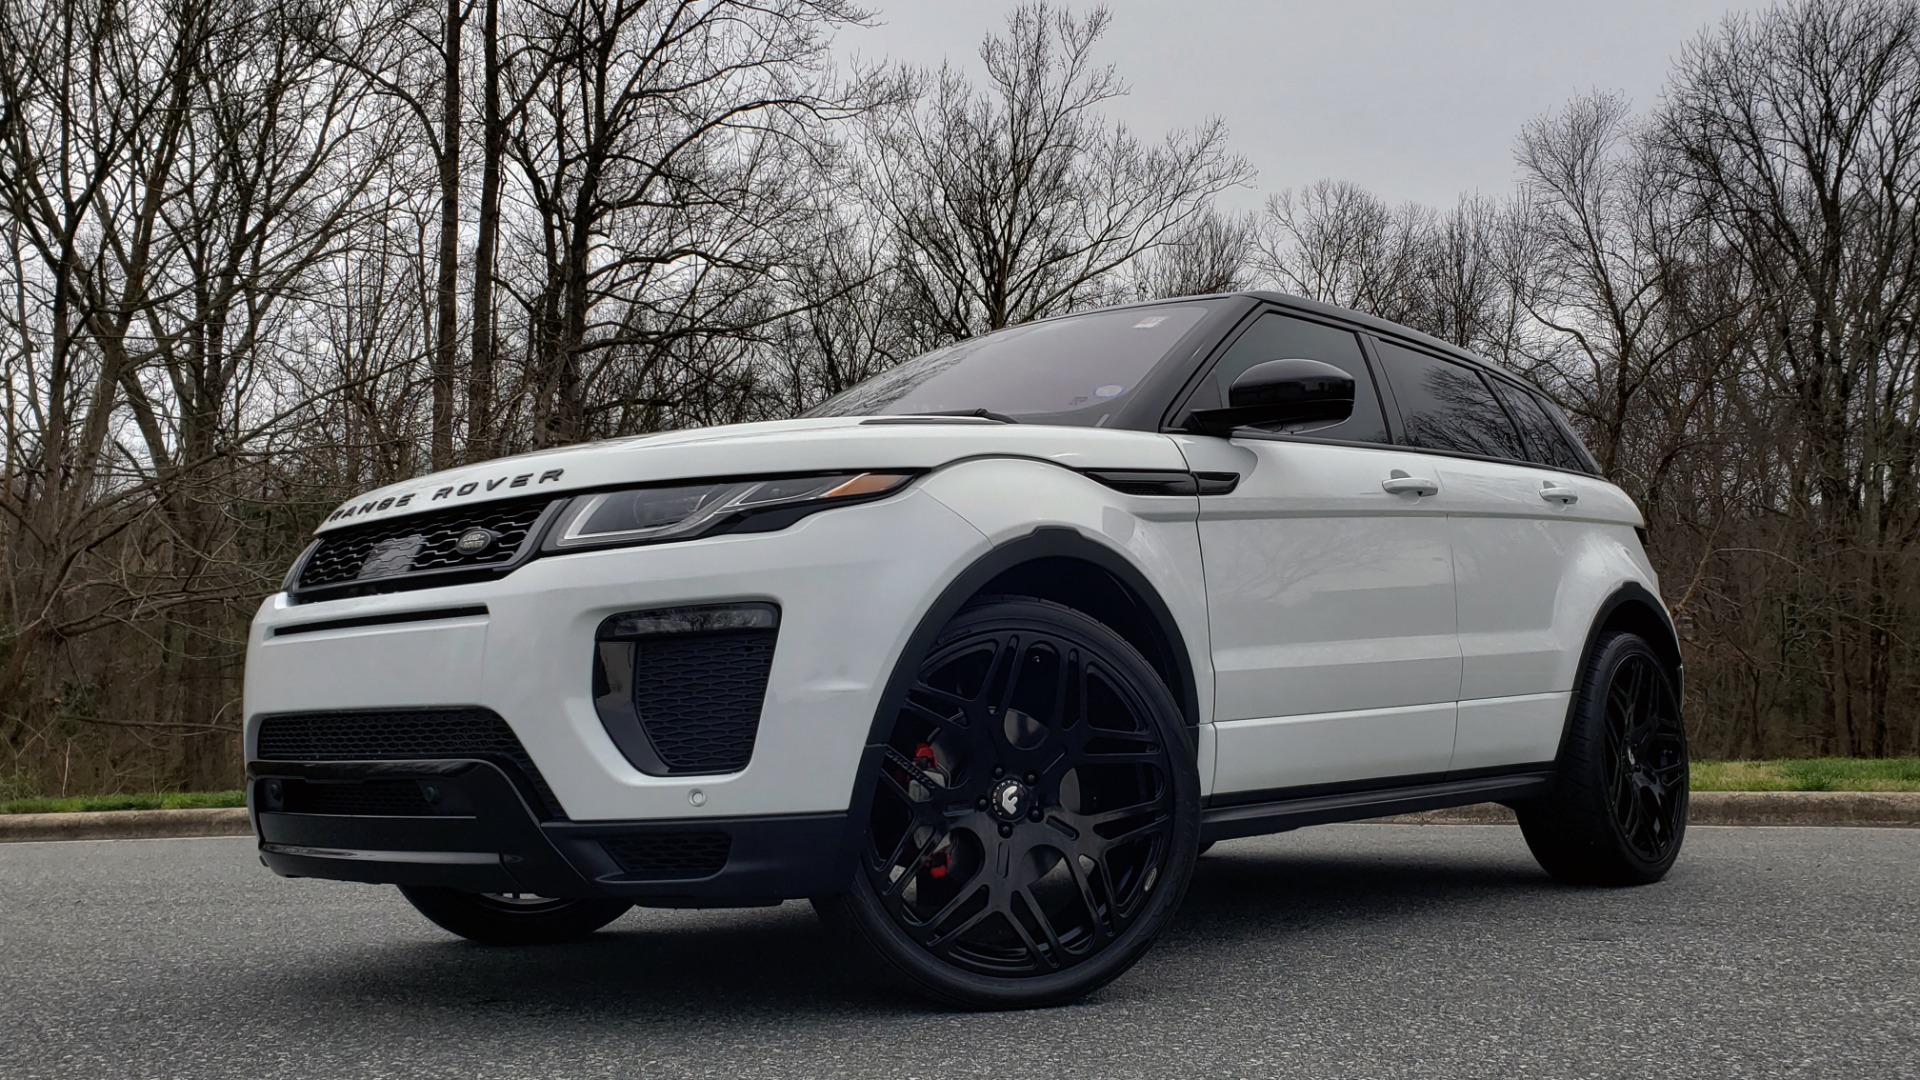 Used 2016 Land Rover RANGE ROVER EVOQUE HSE DYNAMIC / AWD / NAV / PANO-ROOF / REARVIEW / 22-IN WHEELS for sale Sold at Formula Imports in Charlotte NC 28227 2